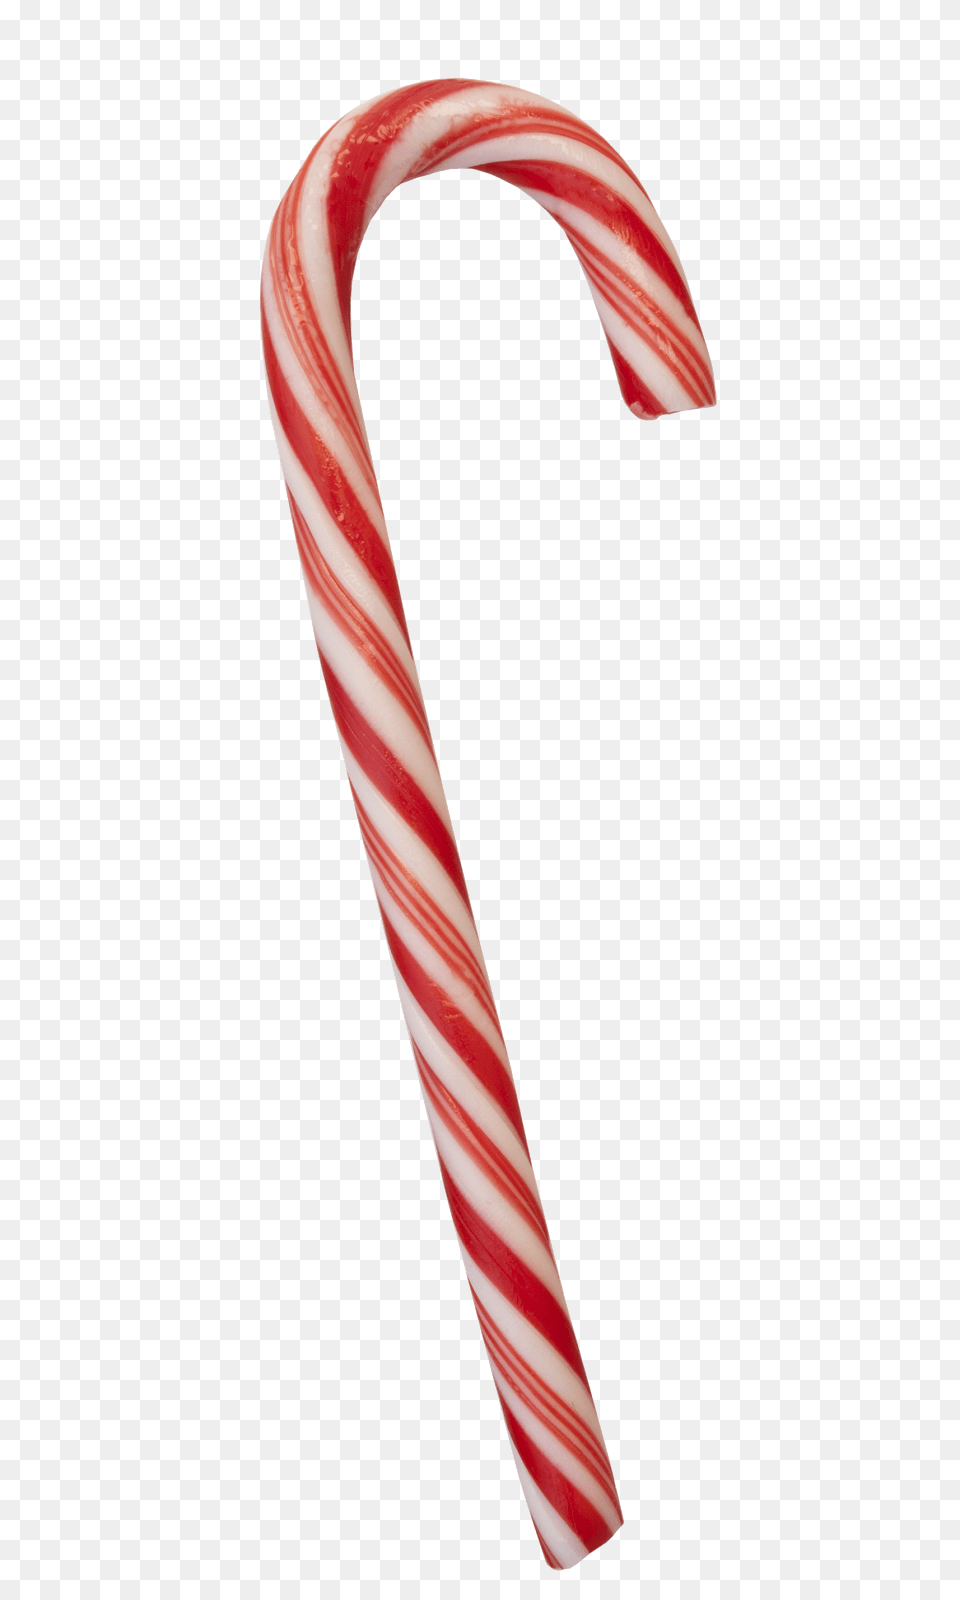 Christmas Candy Free Download Candy, Food, Sweets, Stick, Mace Club Png Image